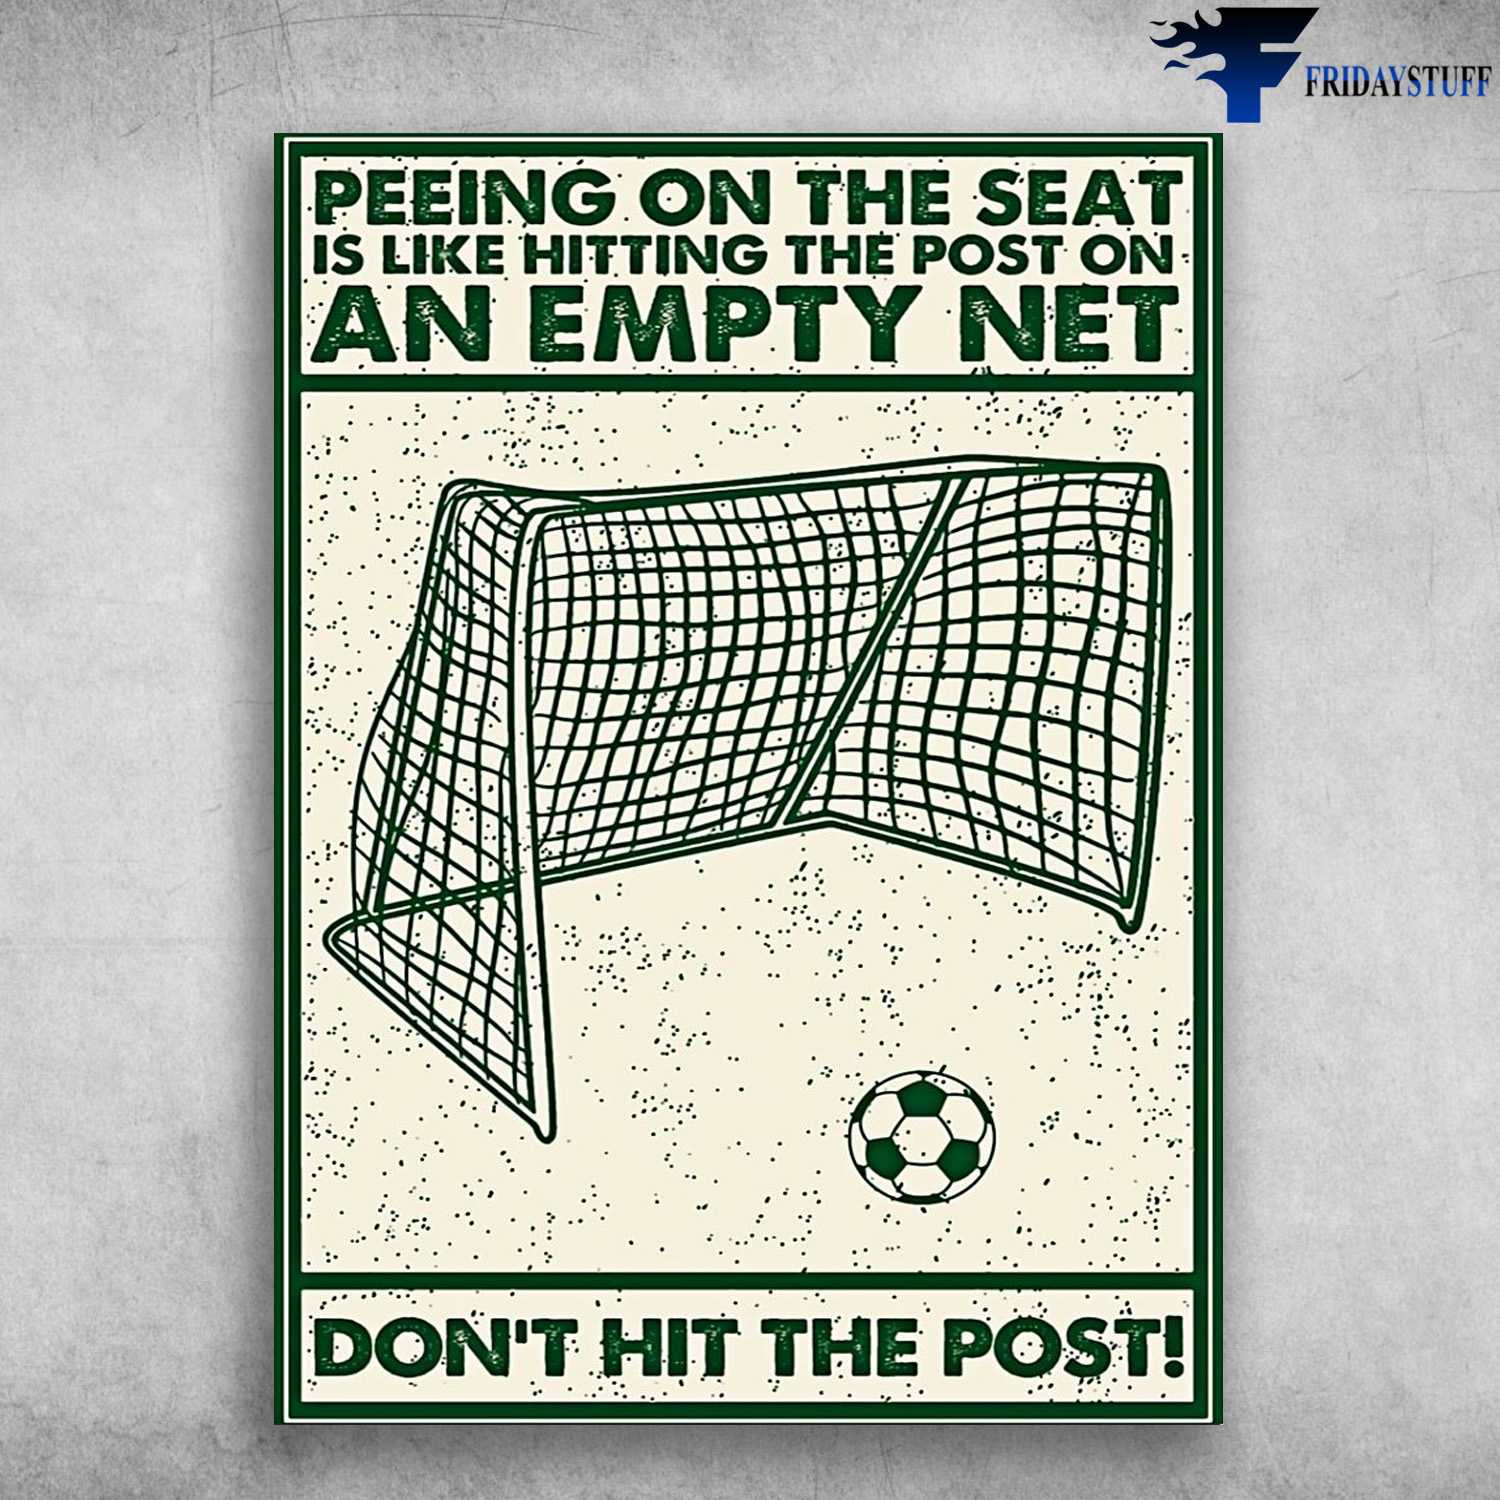 Soccer Decor, Soccer Goal, Peeing On The Seat, Is Like Hitting The Post On An Empty Net, Don't Hit The MostSoccer Decor, Soccer Goal, Peeing On The Seat, Is Like Hitting The Post On An Empty Net, Don't Hit The Most